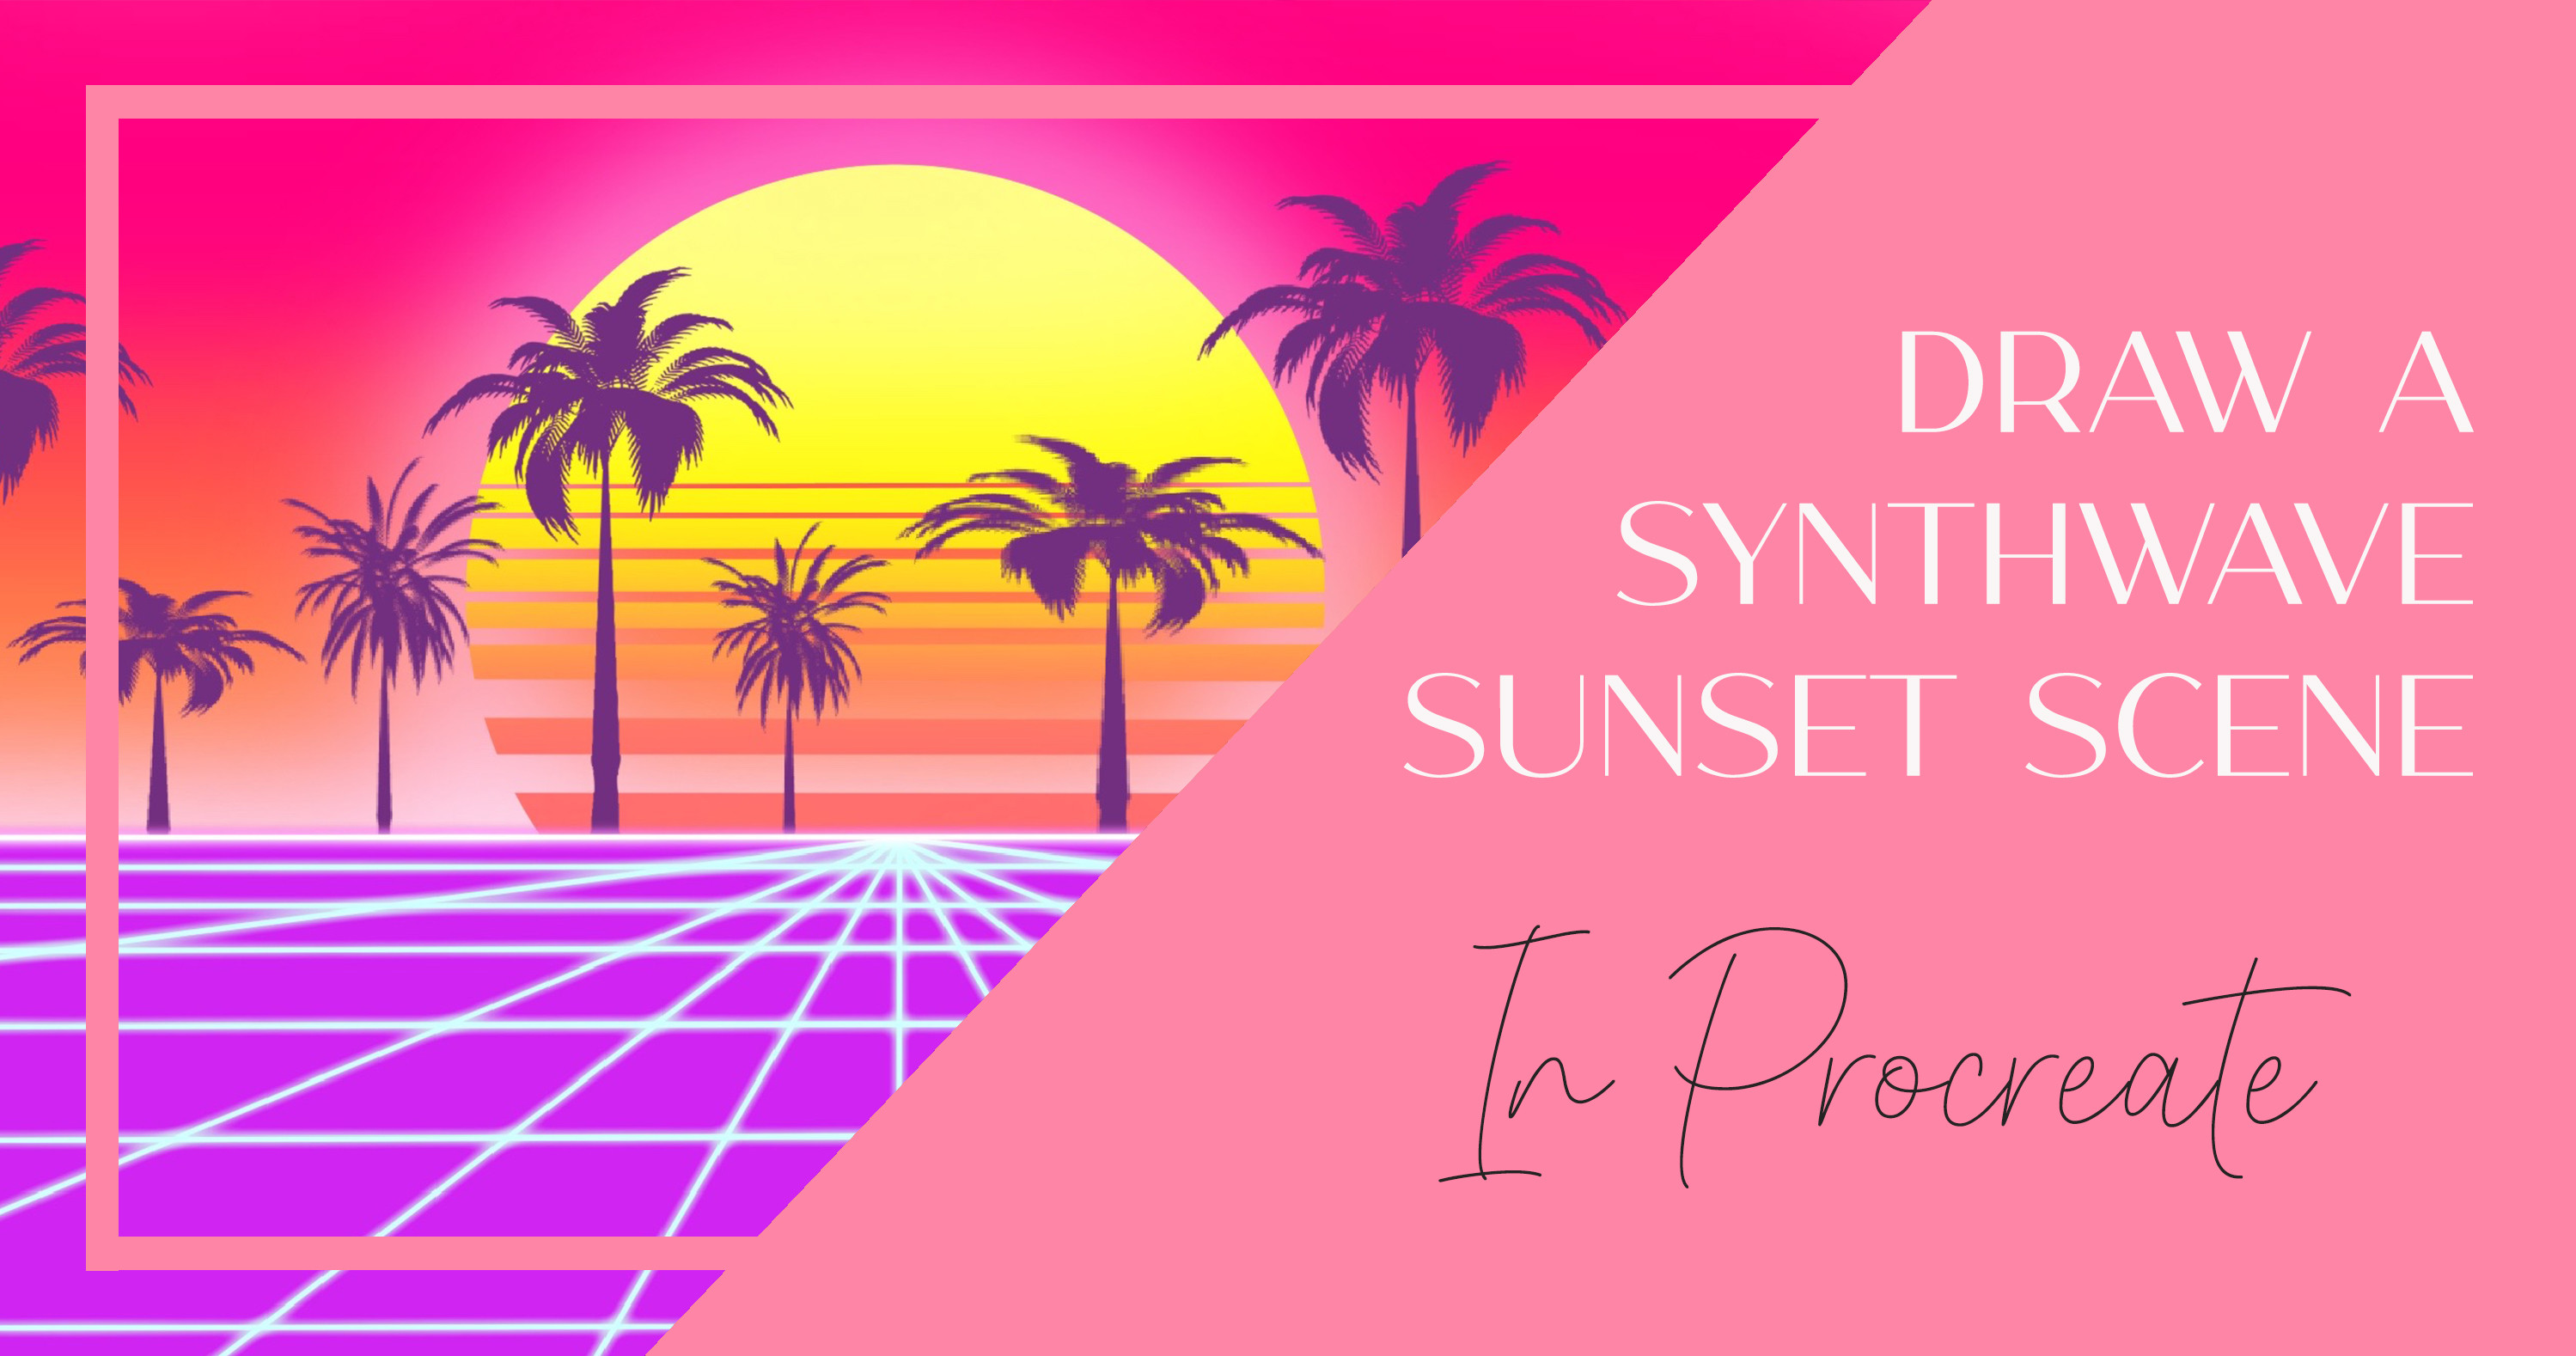 Draw a Synthwave Sunset Scene in Procreate